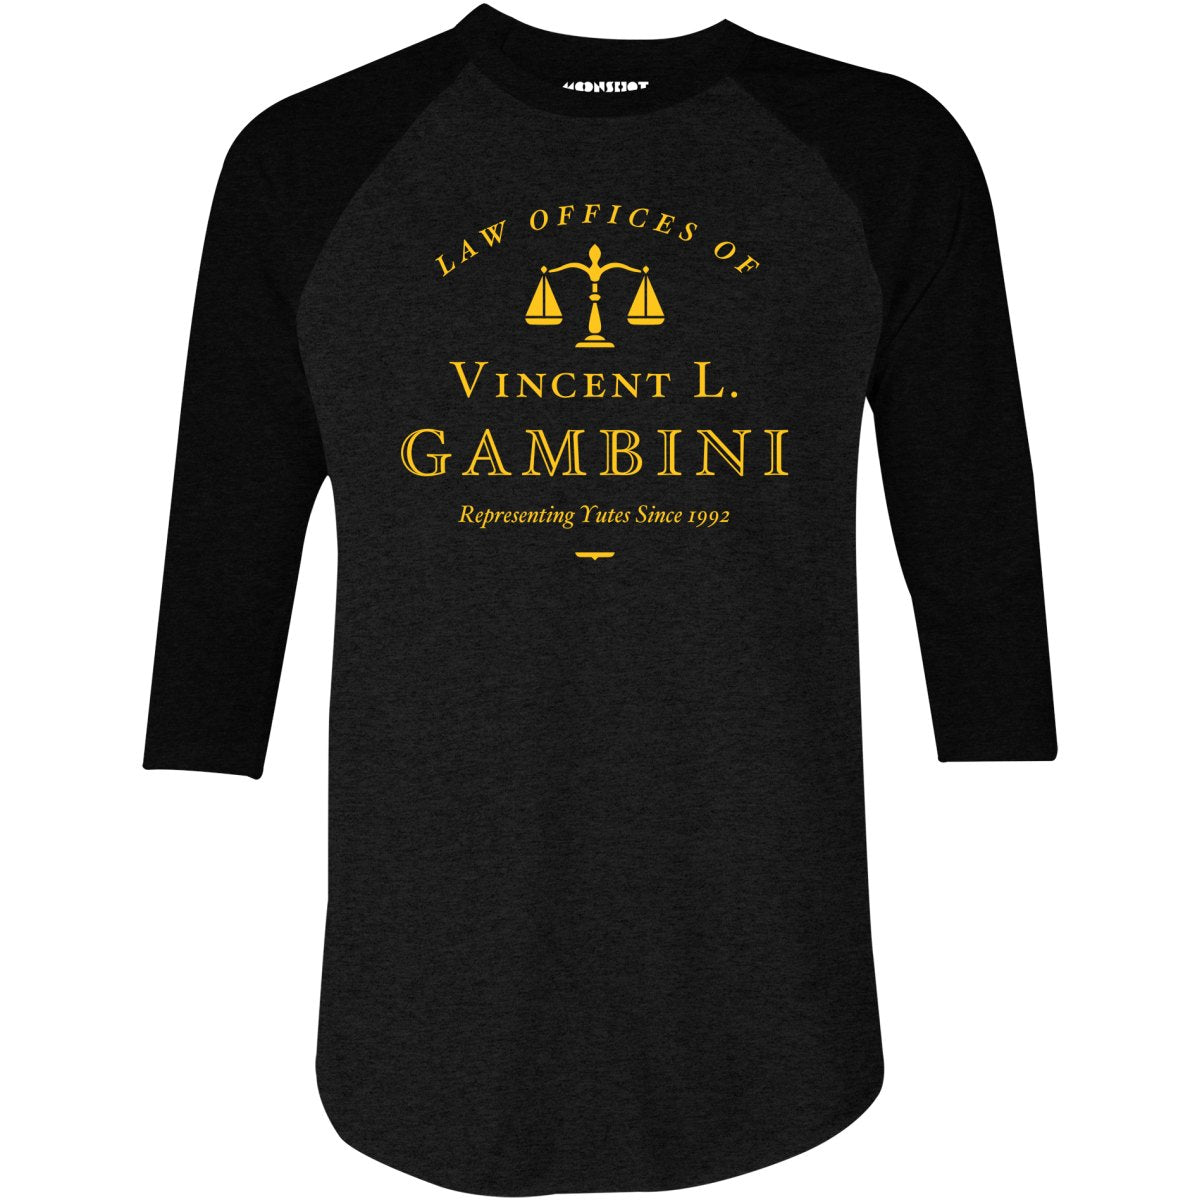 Law Offices of Vincent L. Gambini - 3/4 Sleeve Raglan T-Shirt